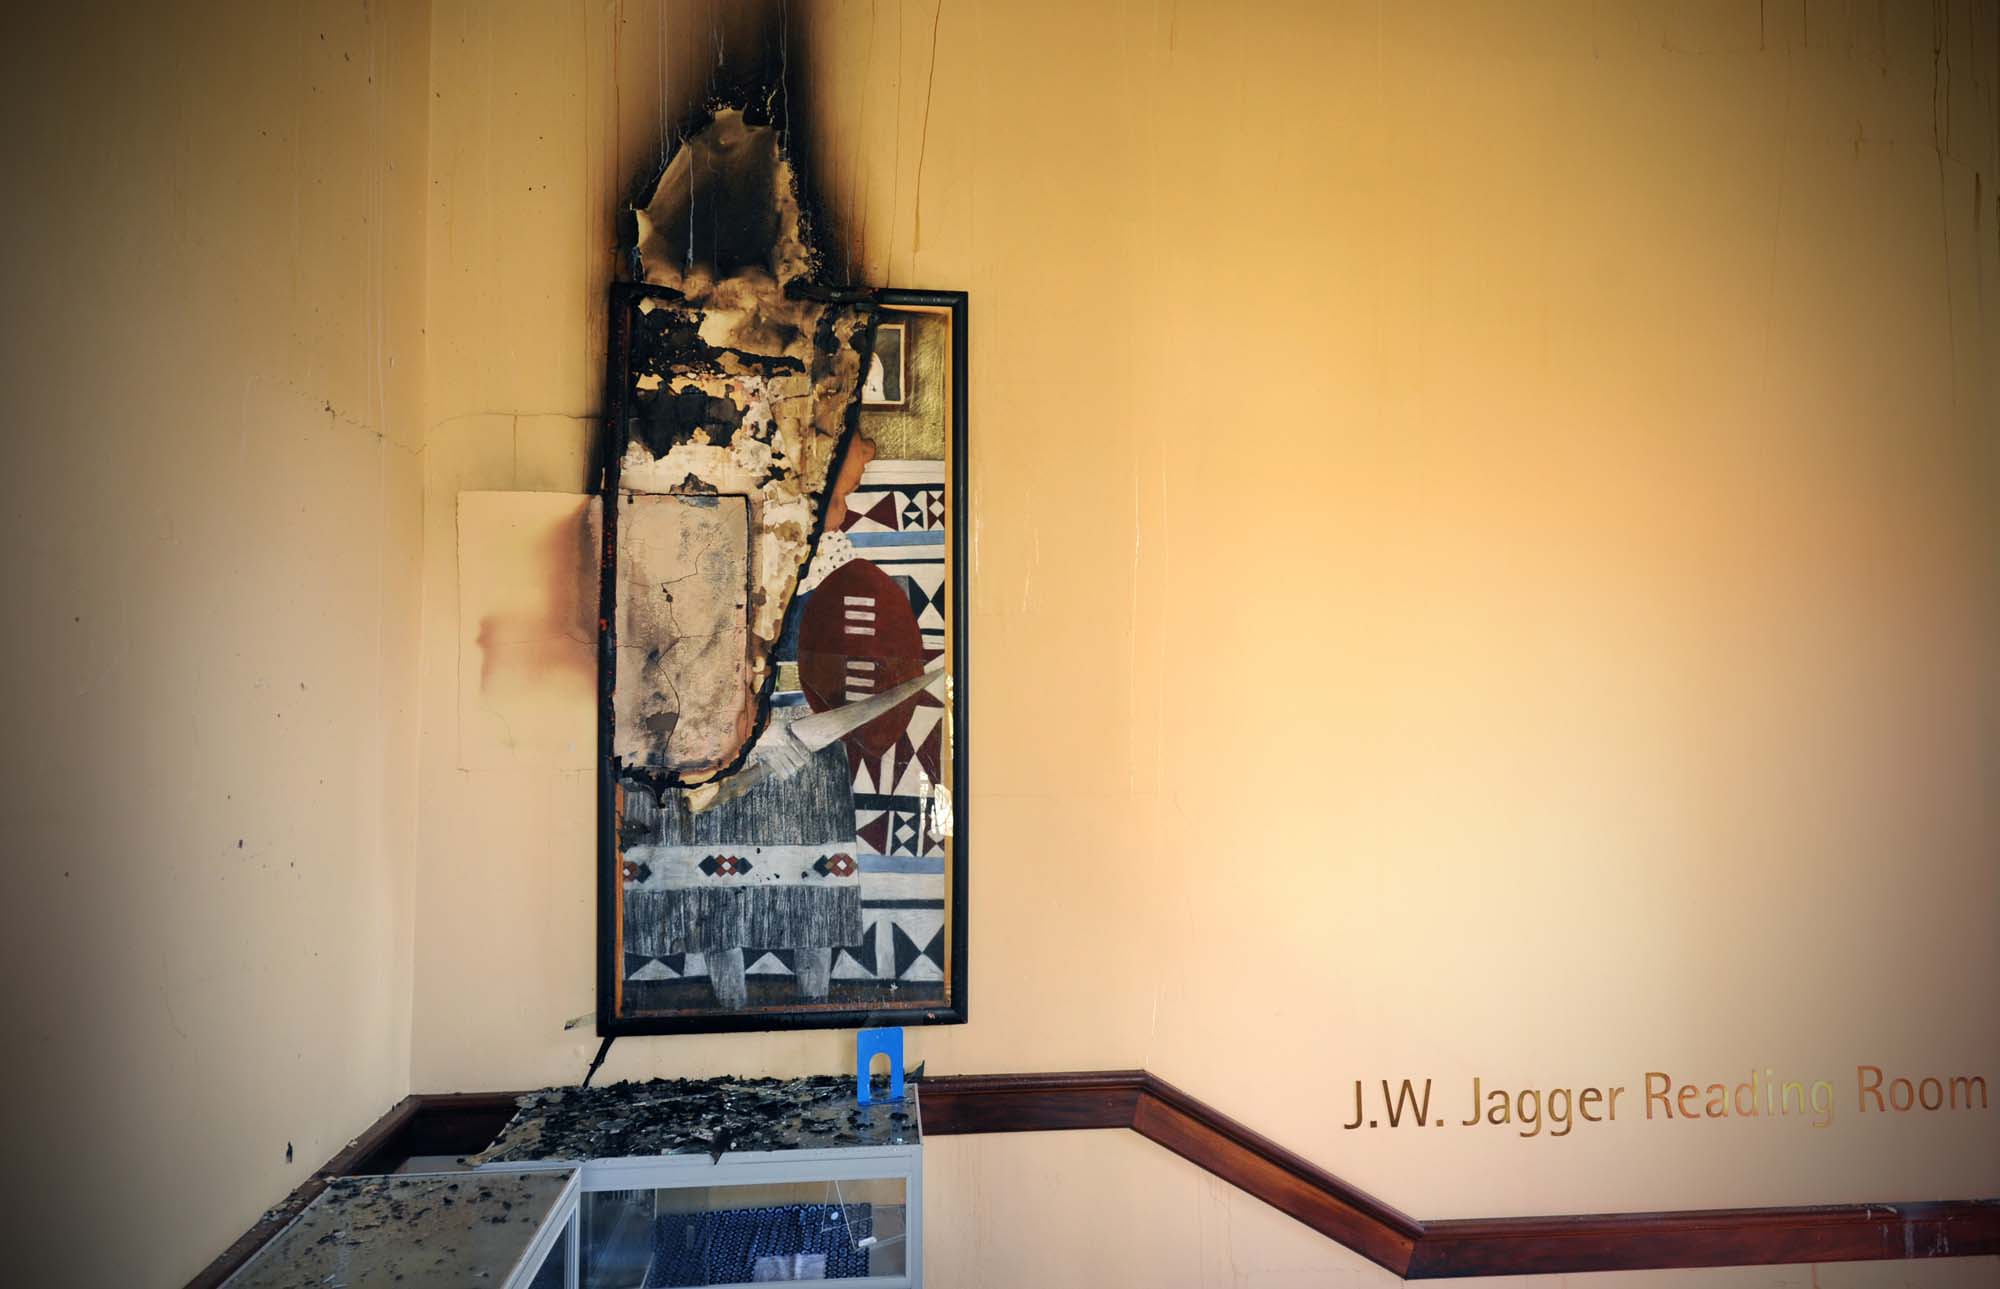 An artwork from the WOAC collection is destroyed.